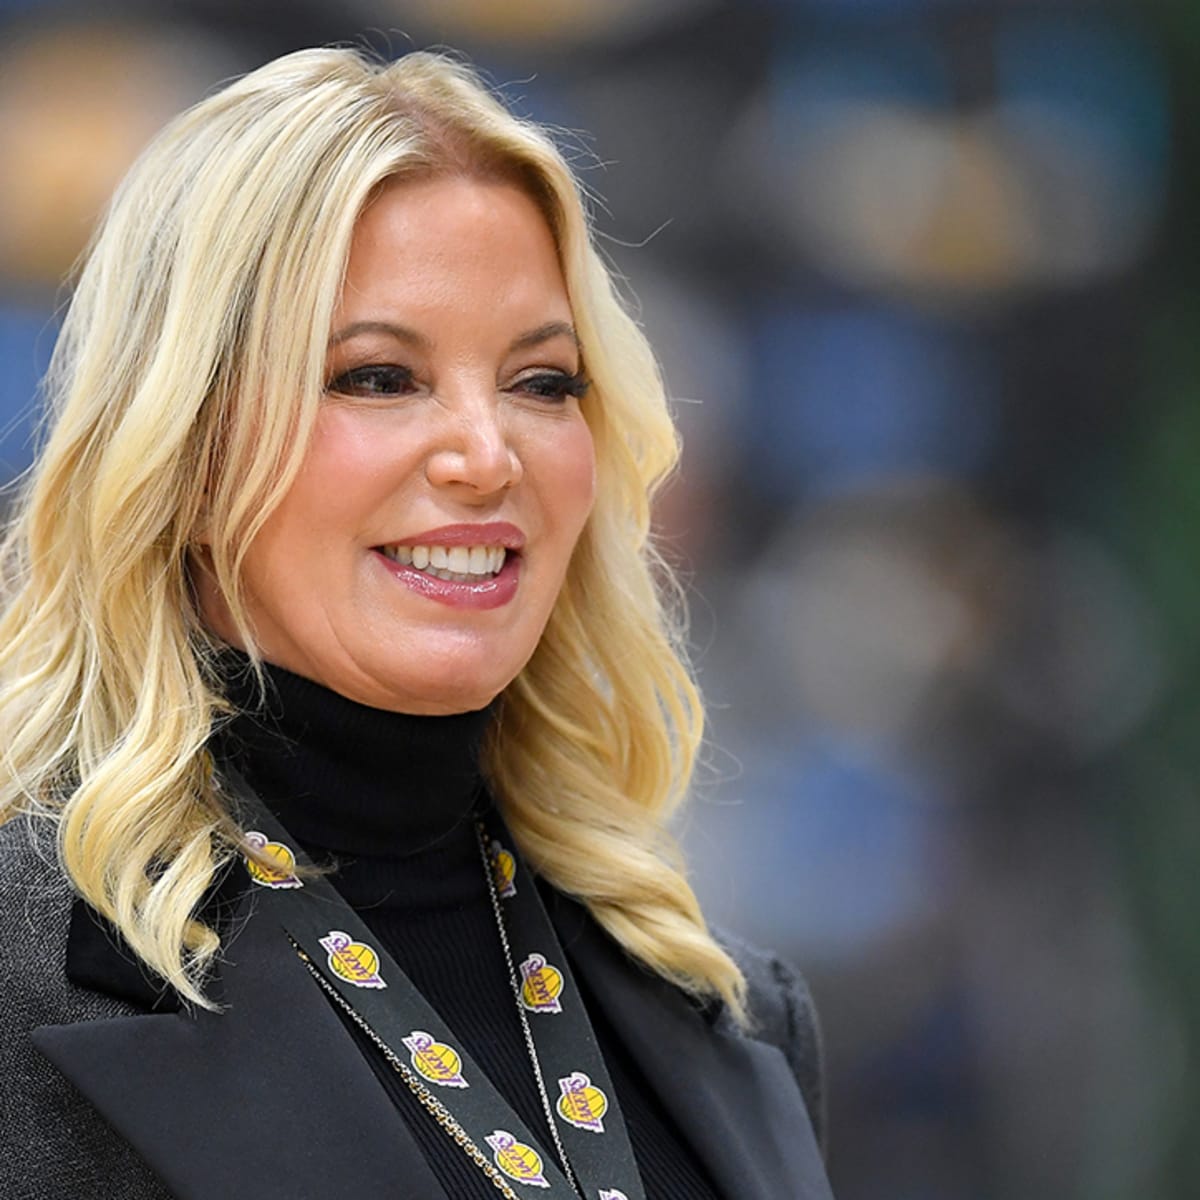 Jeanie Buss confirms Lakers will eventually retire LeBron James' jersey -  NBC Sports